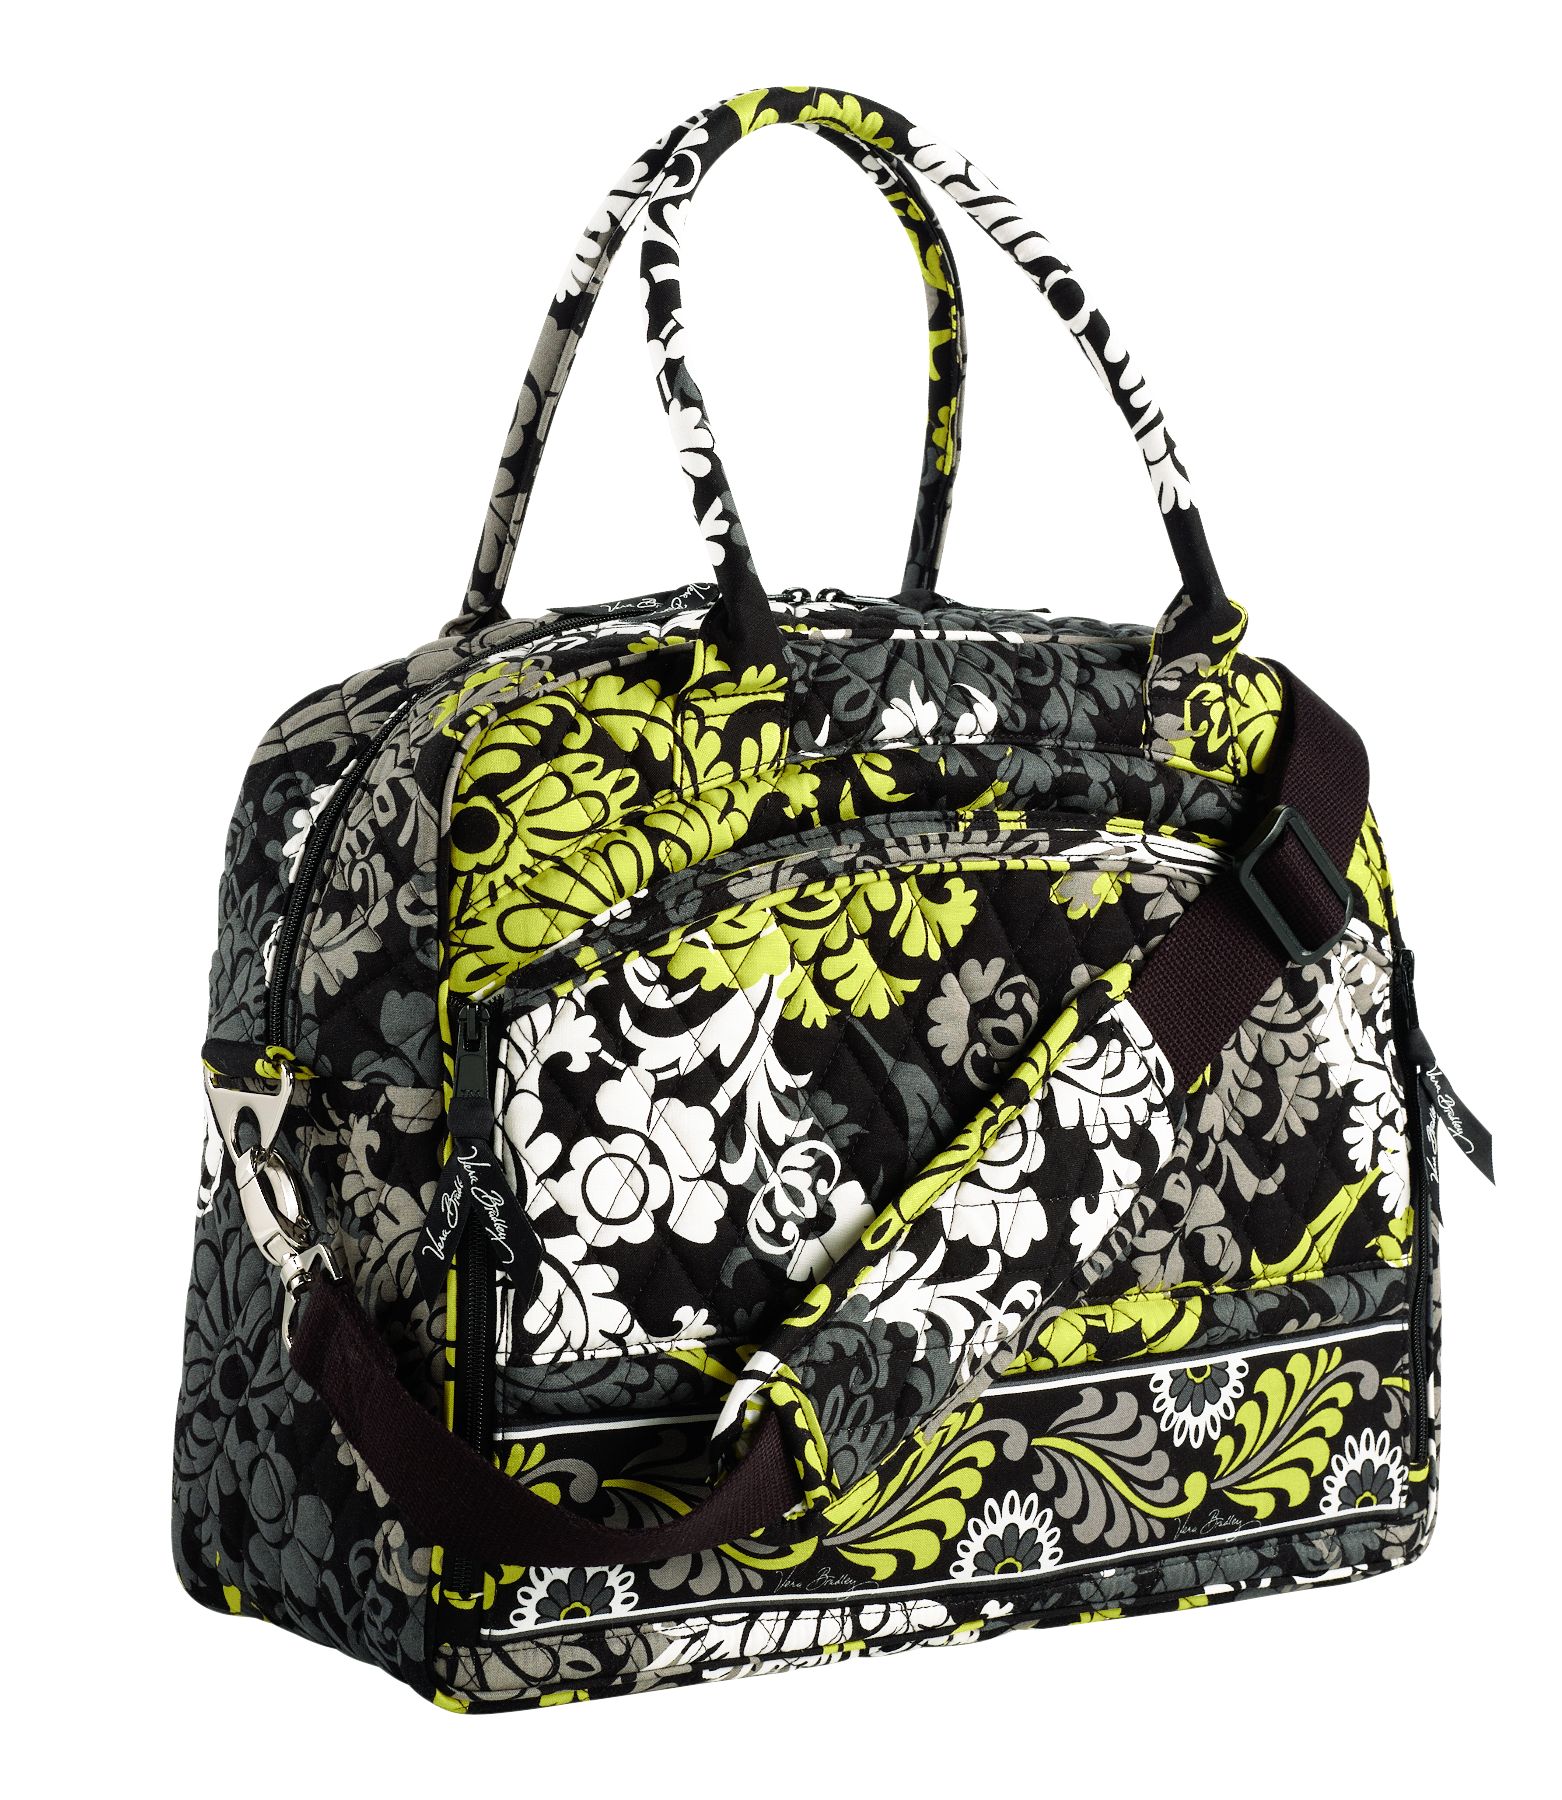 ... you know why they could never compare to a true vera bradley bag